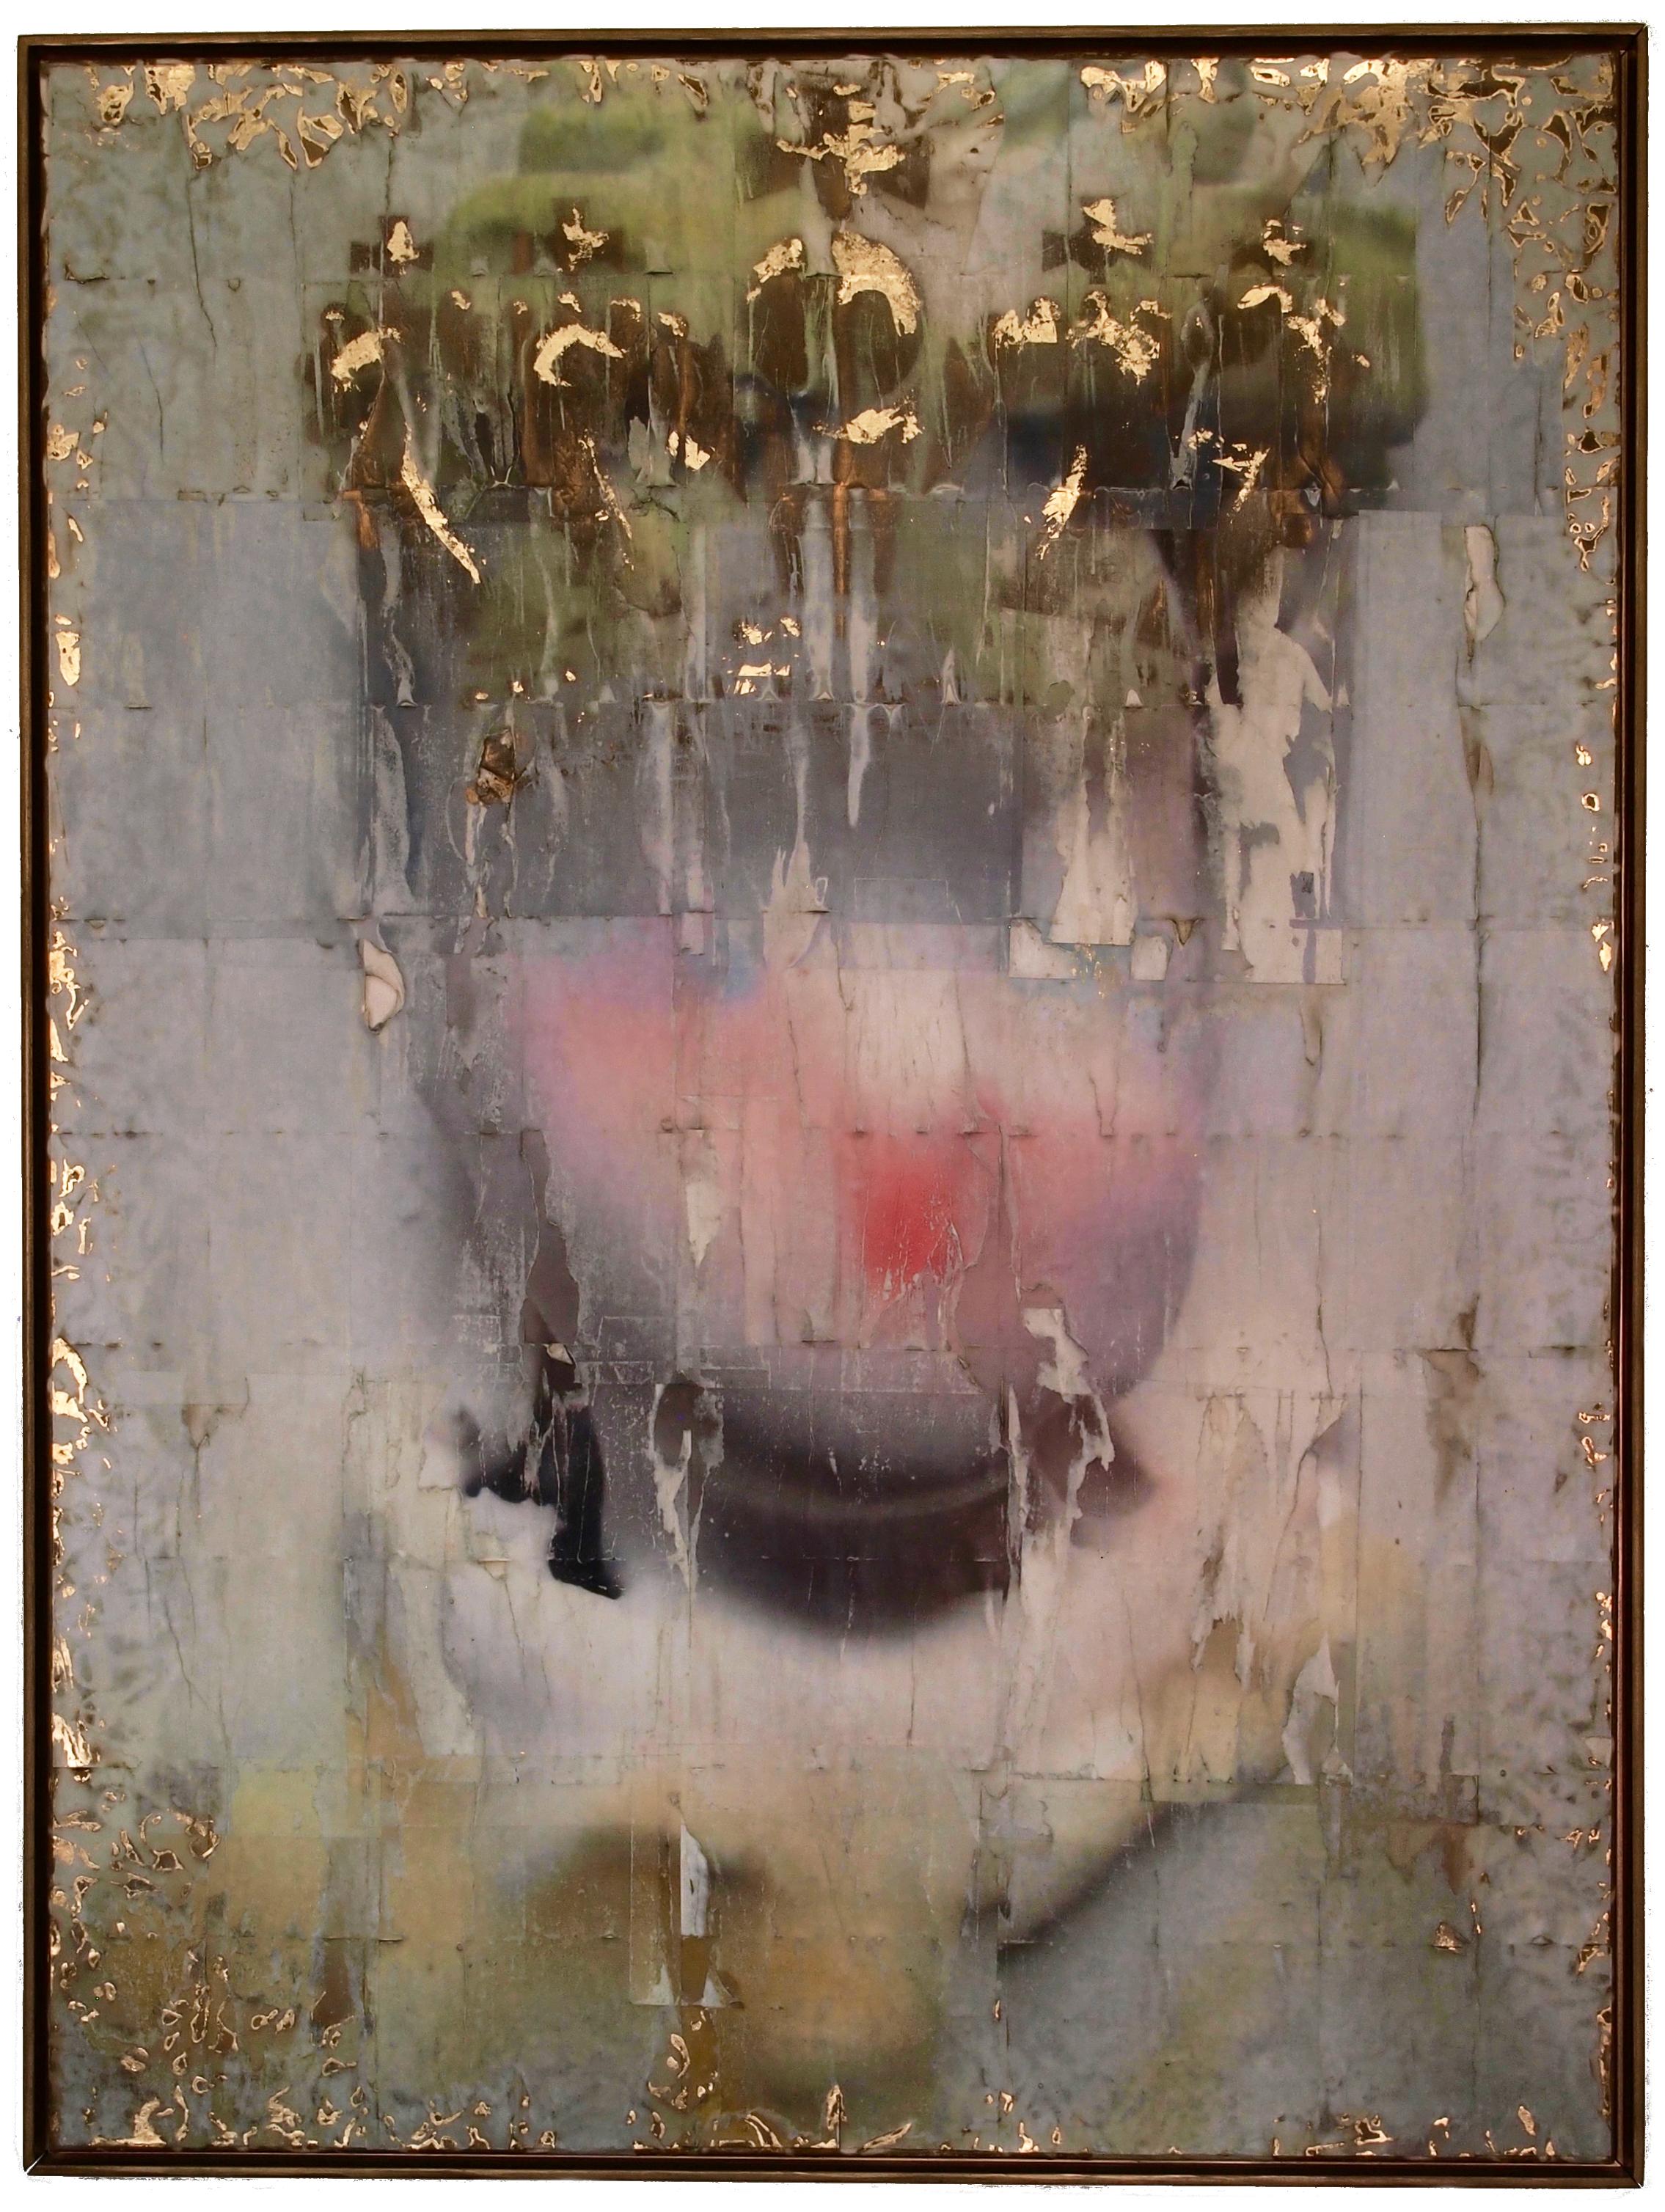 Artist: Stephanie Todhunter
Title: Queen Beth (Disassembled/assembled) 
Medium: Collage, Mixed Media, Spray Paint, Gold Leaf, Wax on Canvas
Size: 36 x 48 inches
Year: 2016

Stephanie Todhunter is an interdisciplinary artist based outside of Boston,